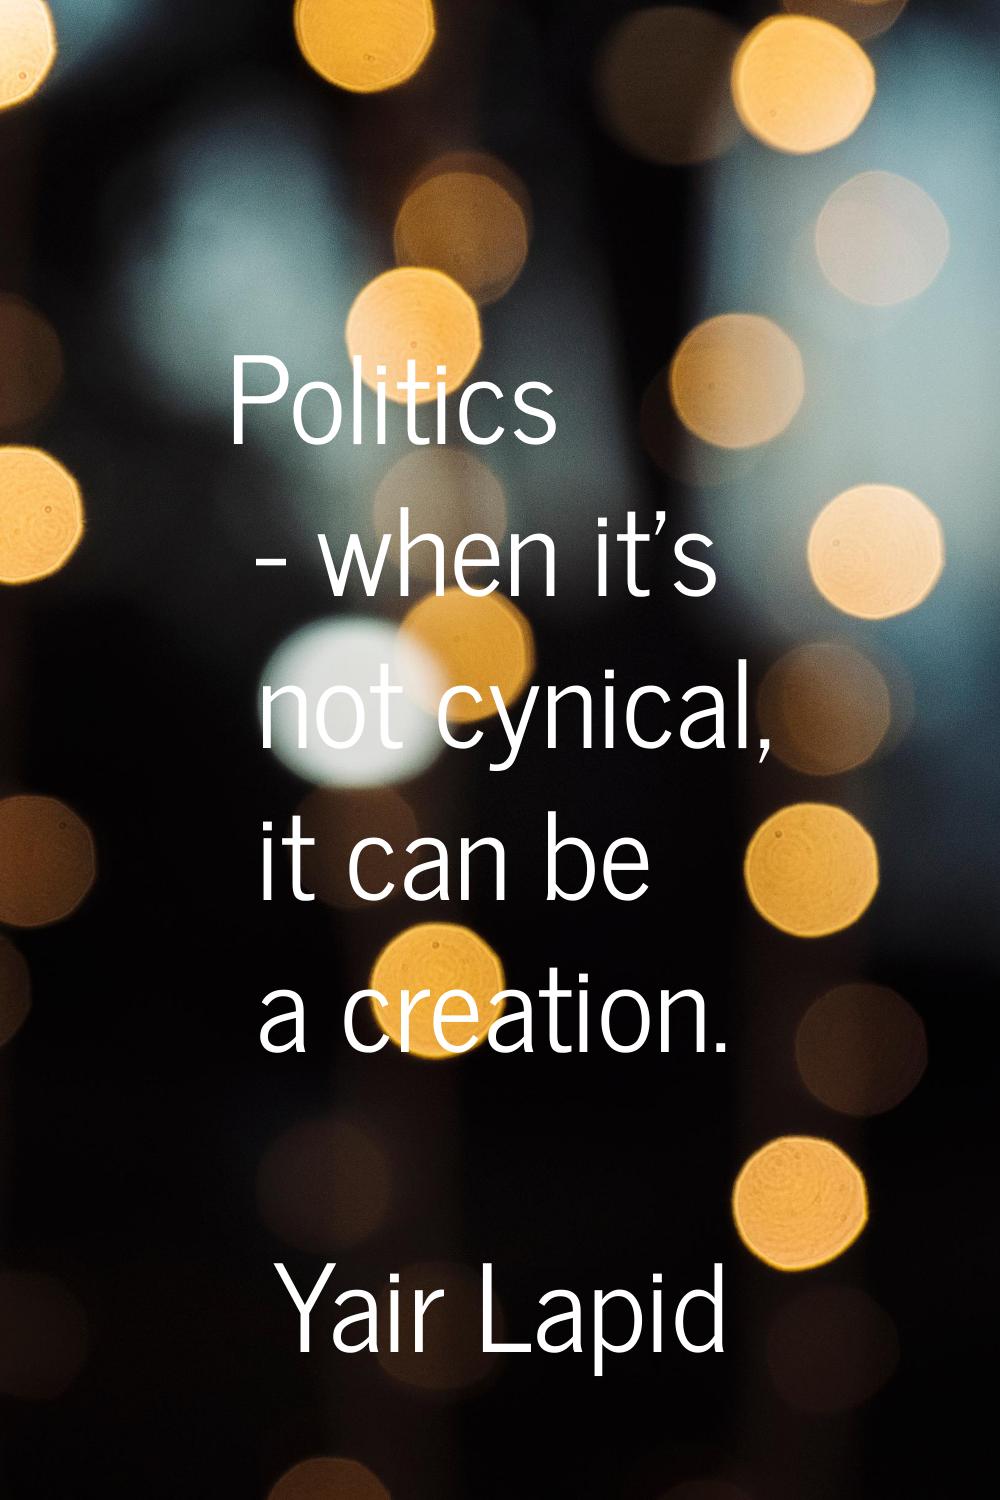 Politics - when it's not cynical, it can be a creation.